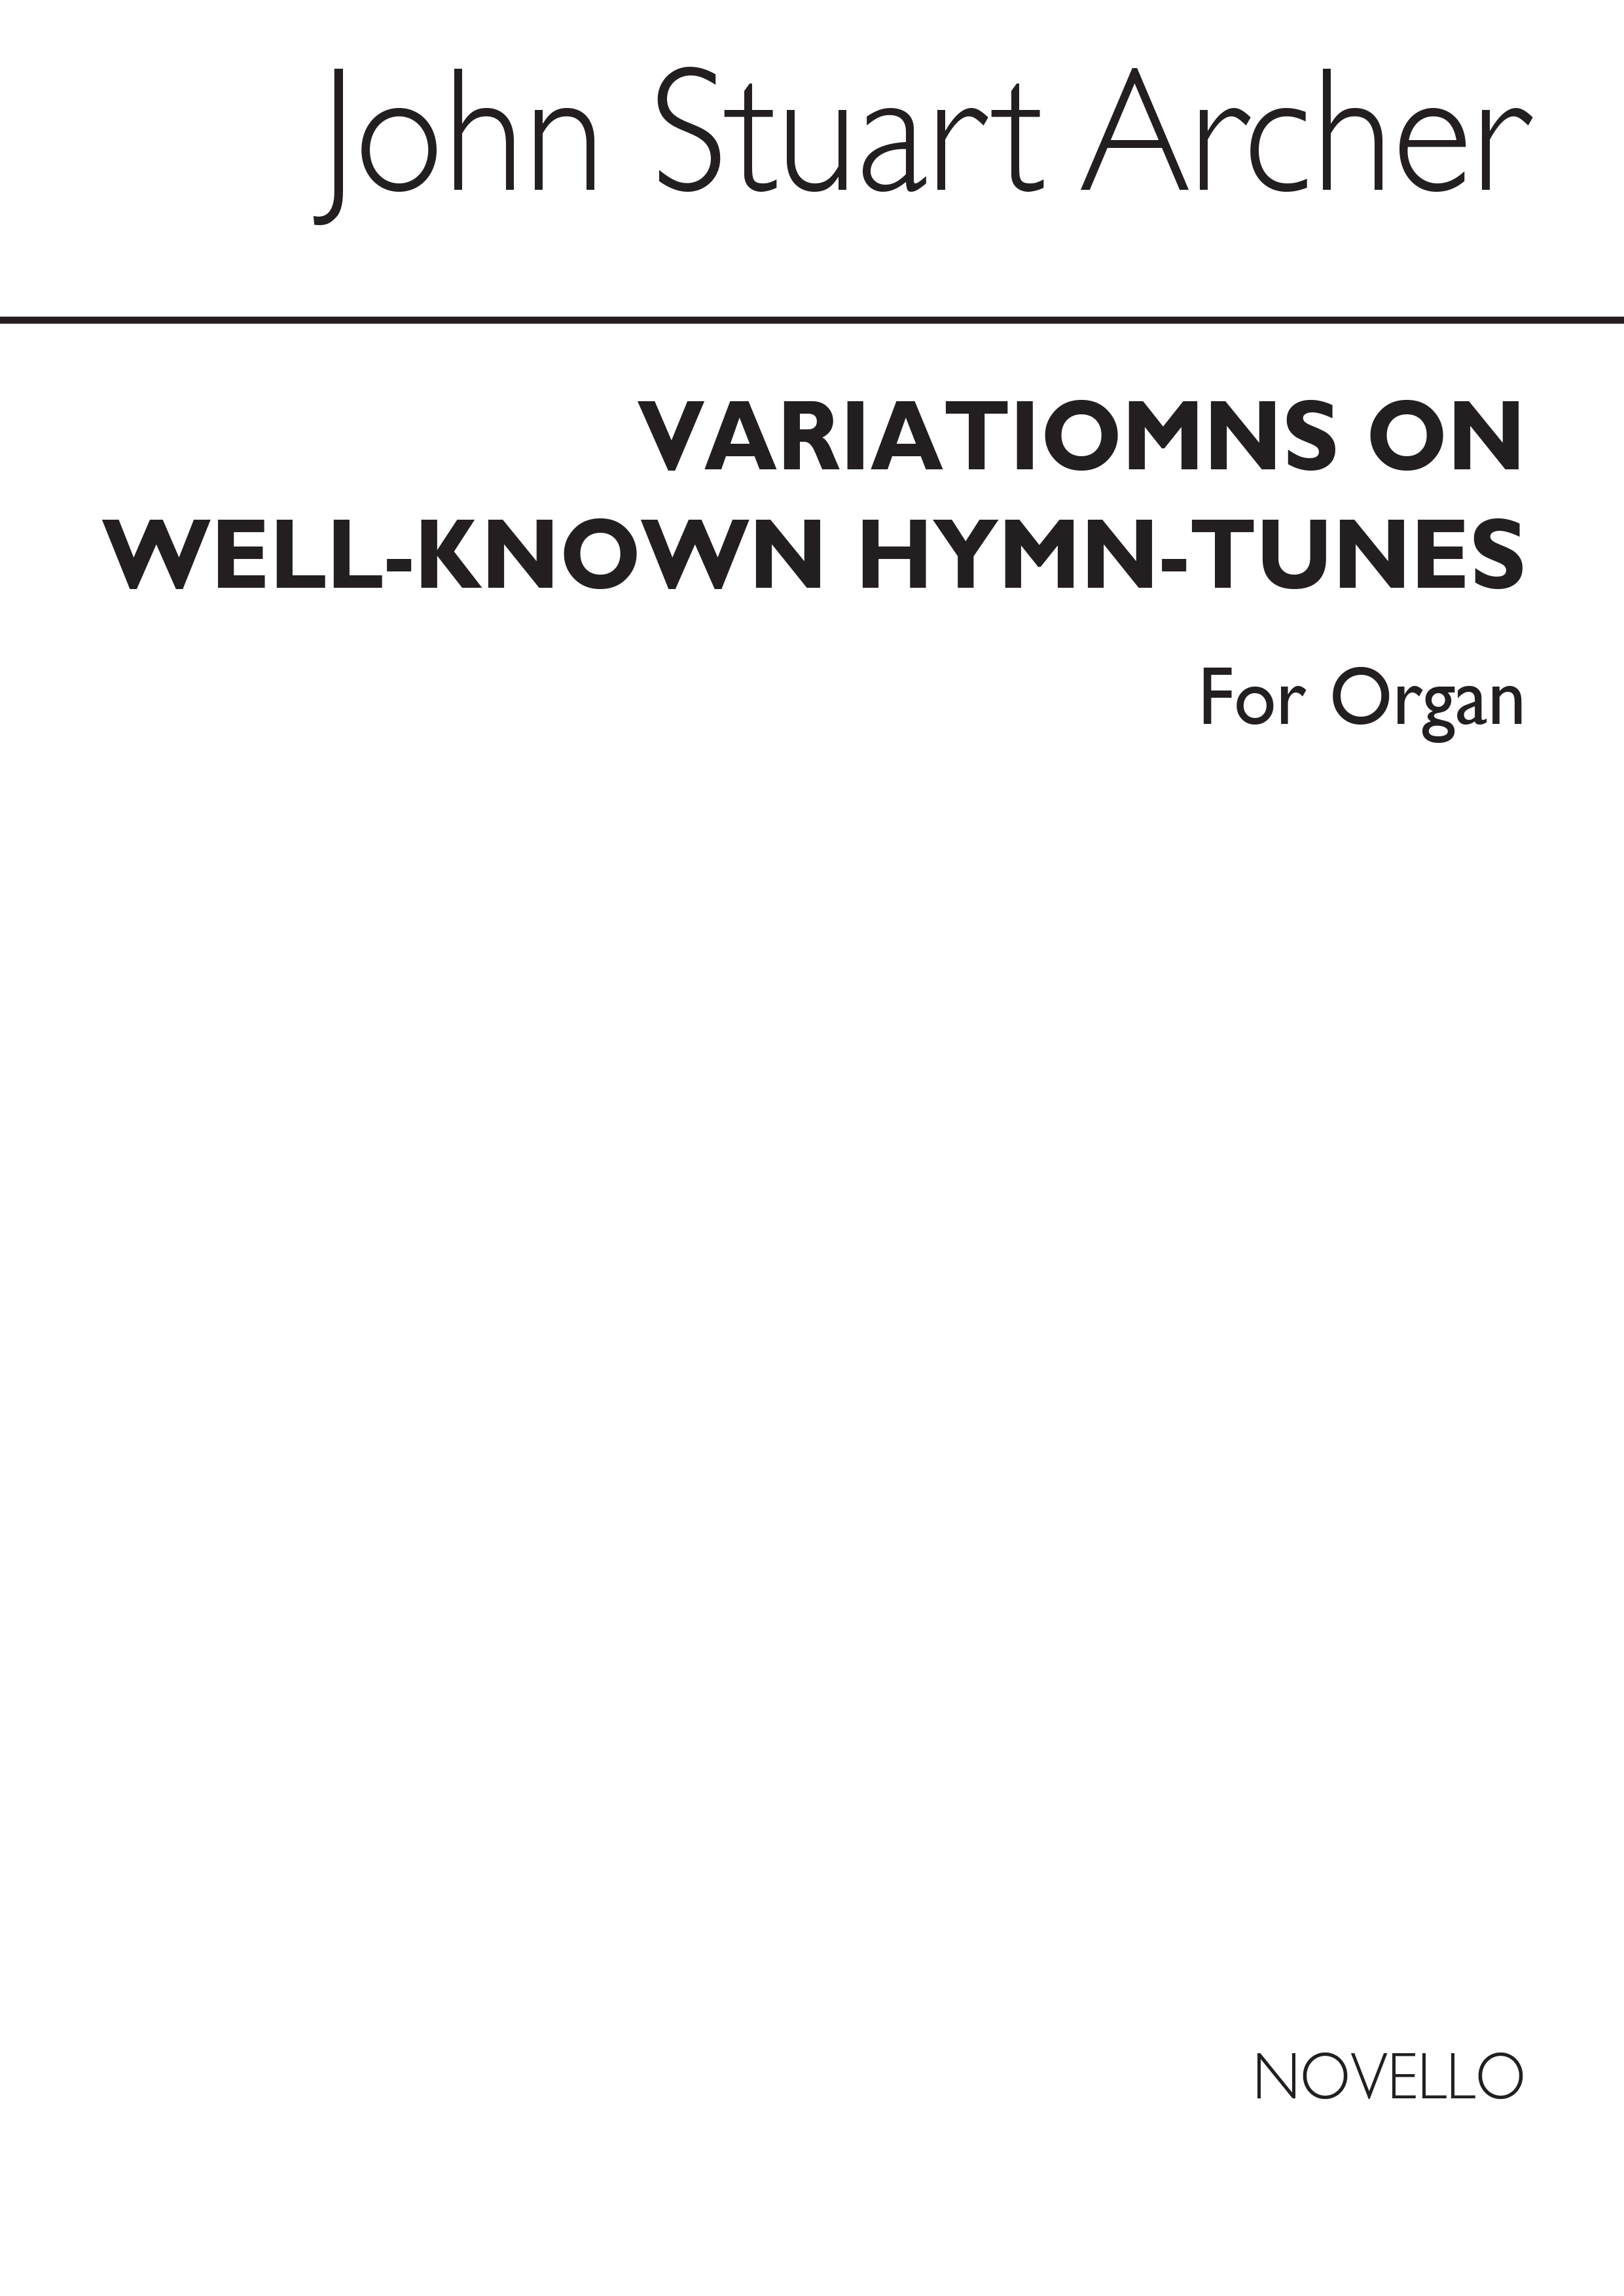 J. Stuart Archer: Variations On Well Known Hymn Tunes for Organ